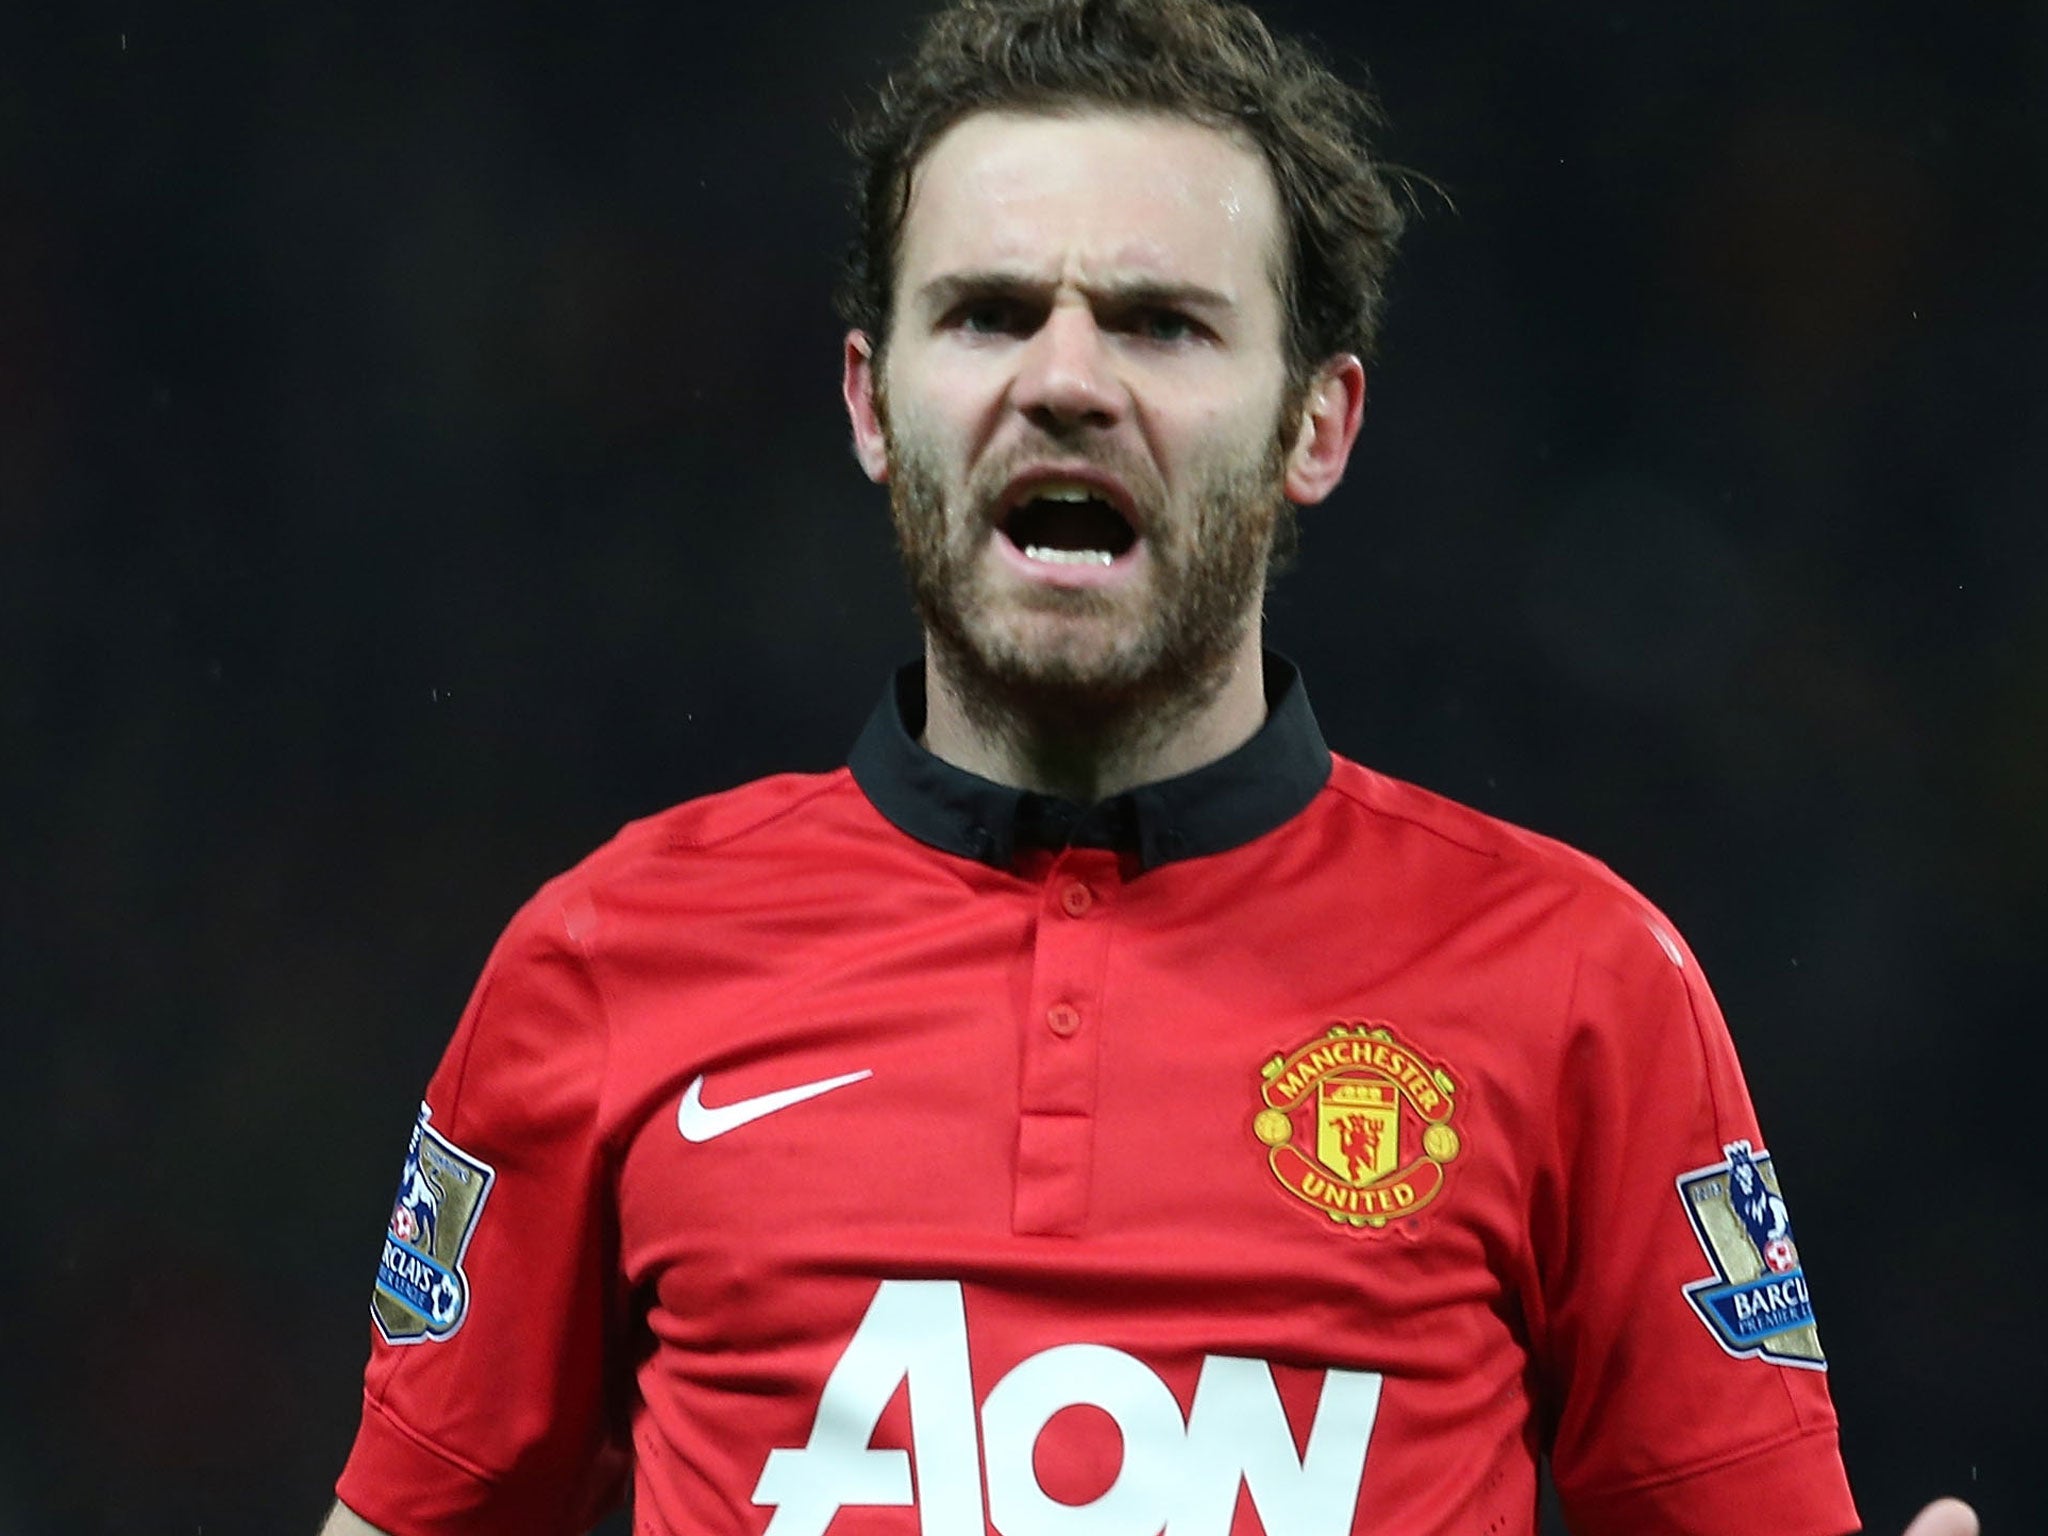 Juan Mata joined Manchester United in January